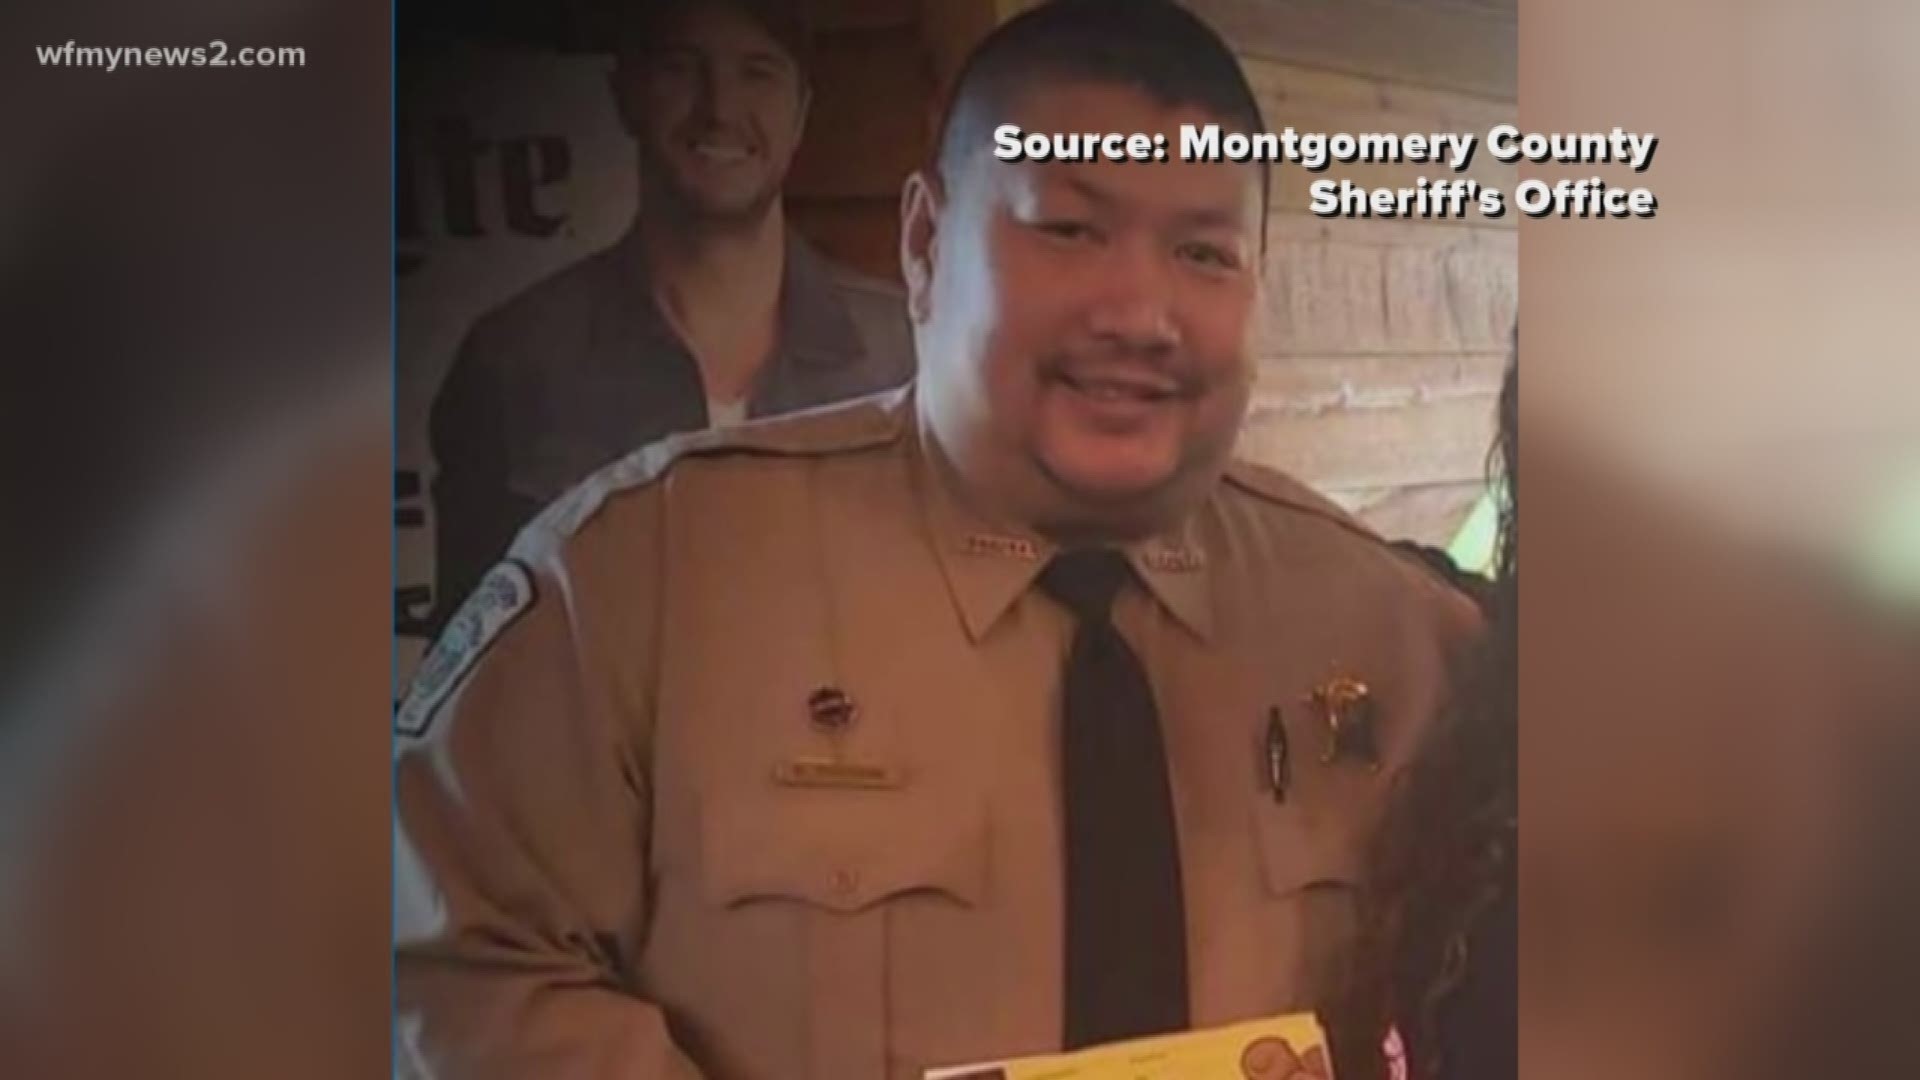 Montgomery County Deputy Bud Phouang died from complications related to the coronavirus, the Montgomery County Sheriff's Office said. Deputy Bud was also an SRO.